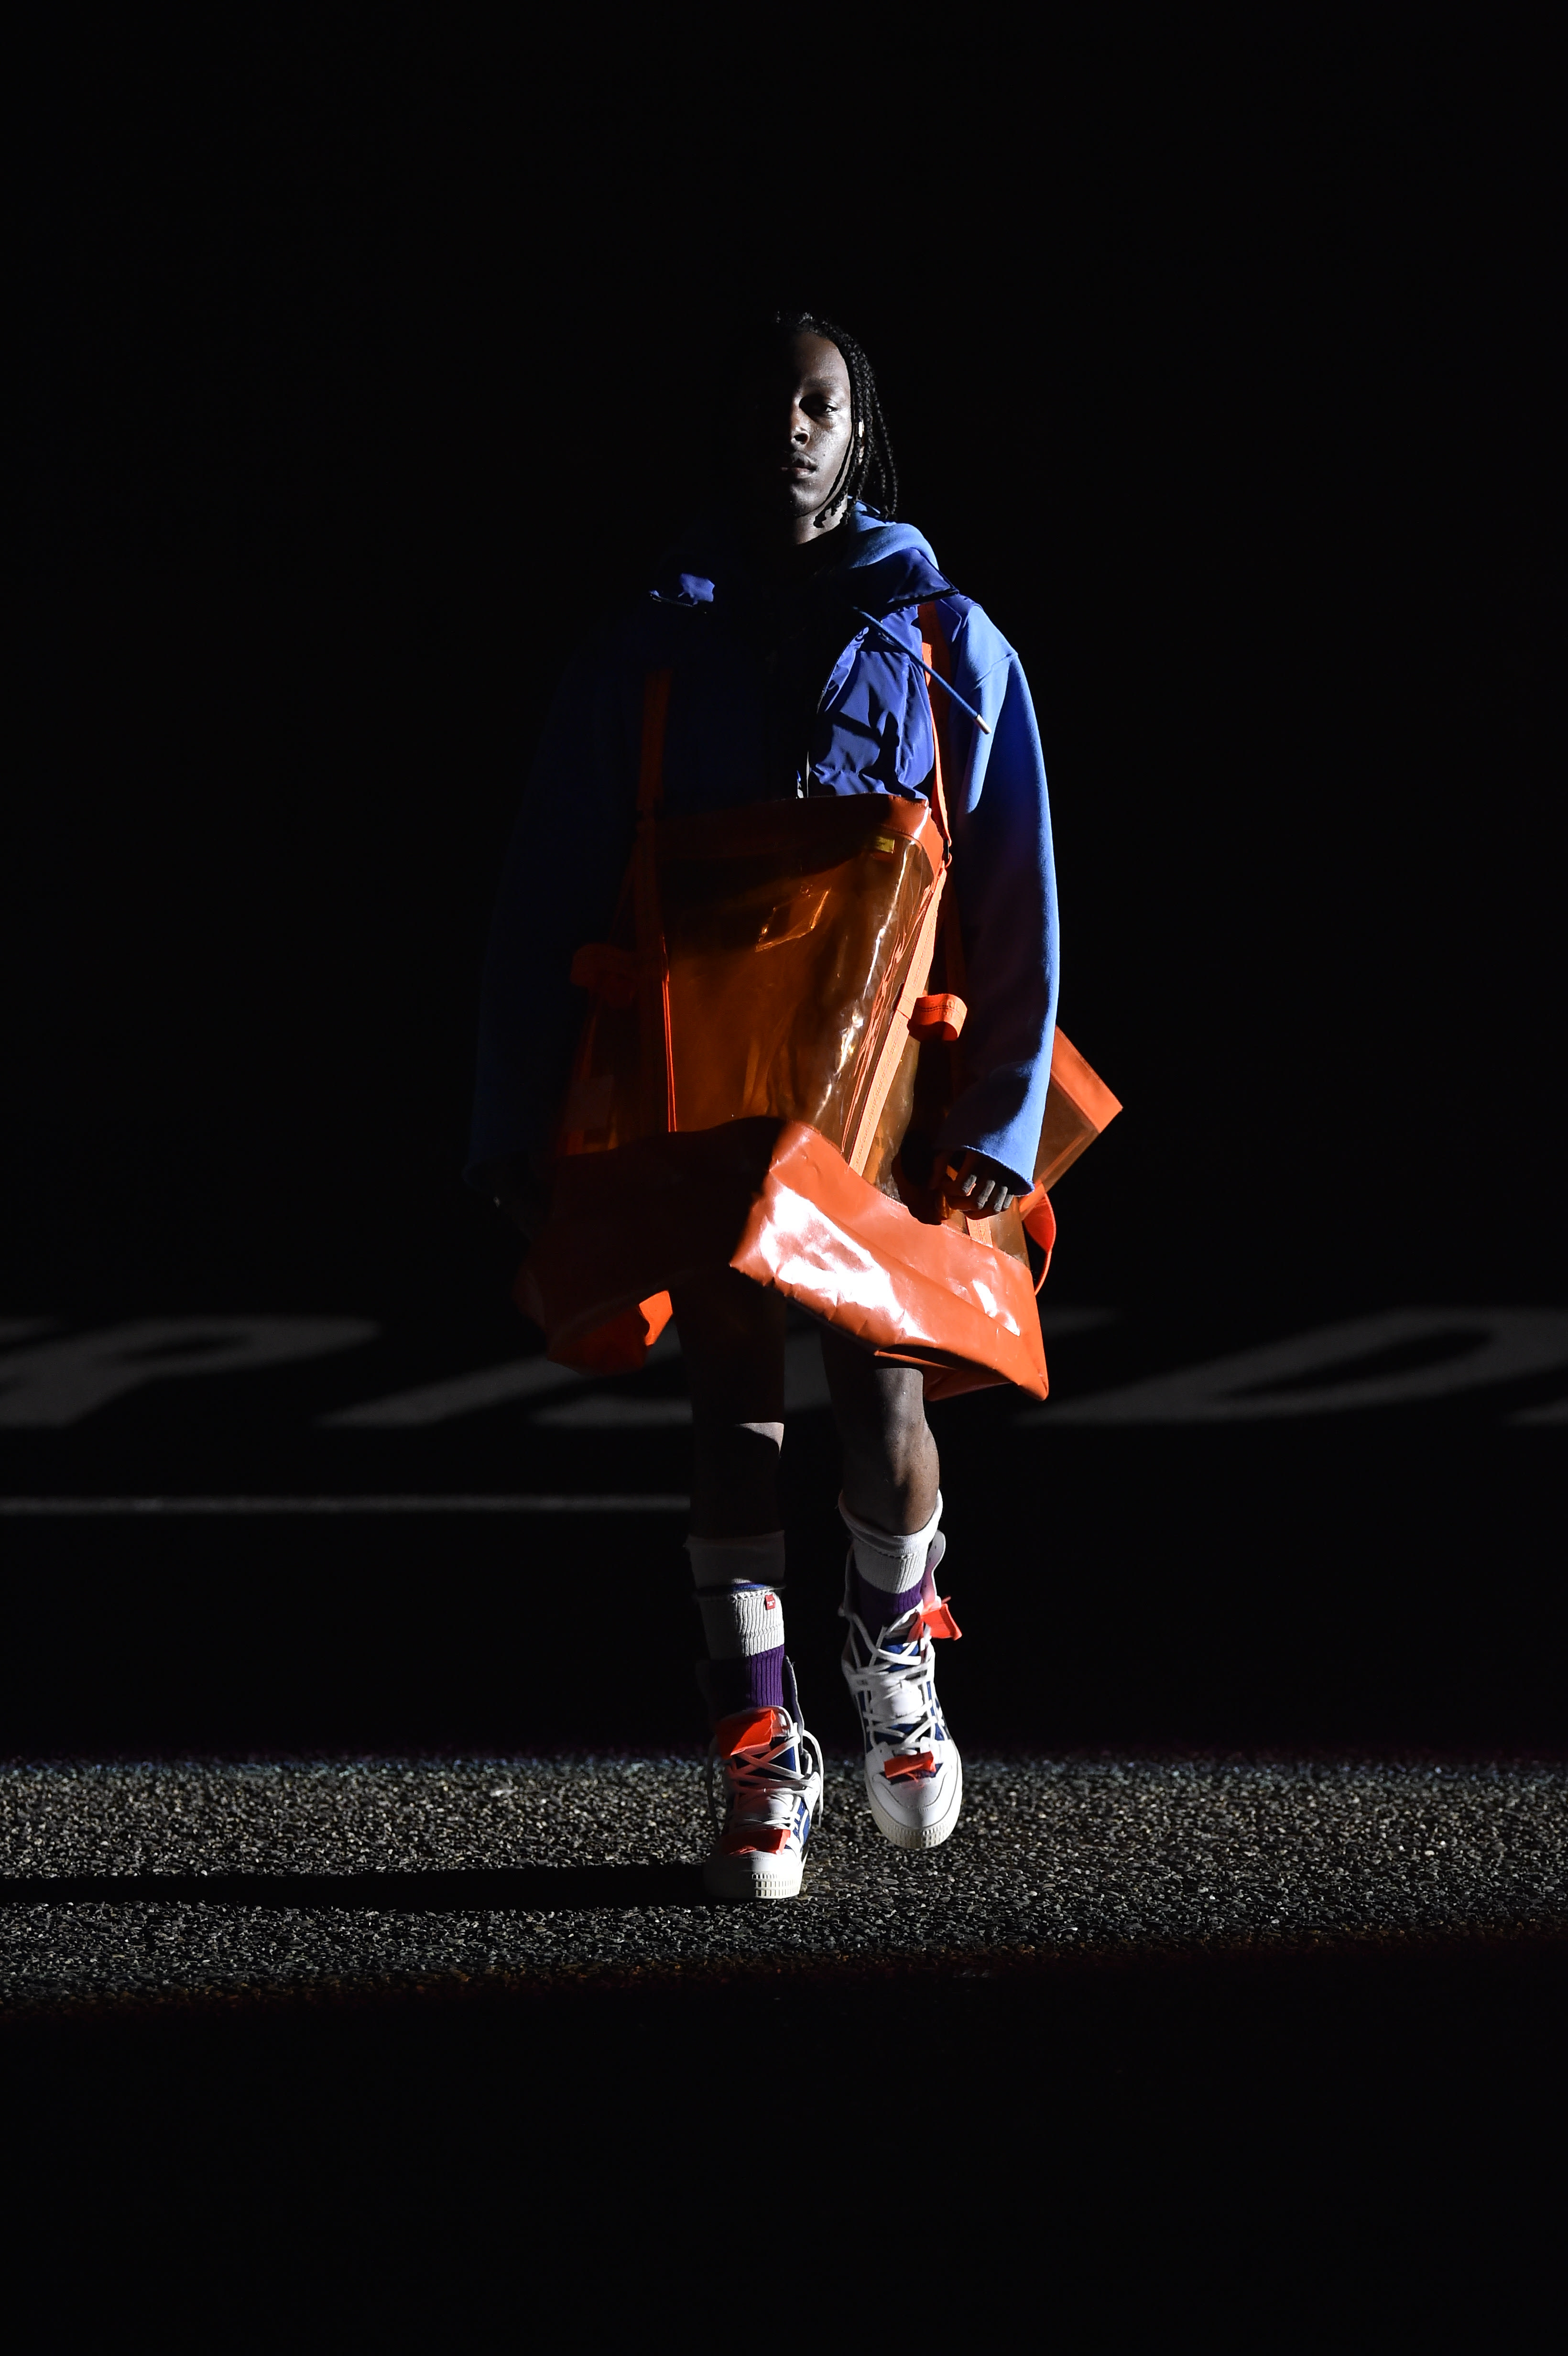 Virgil Abloh Projects Politics Into His Florence Fashion Show